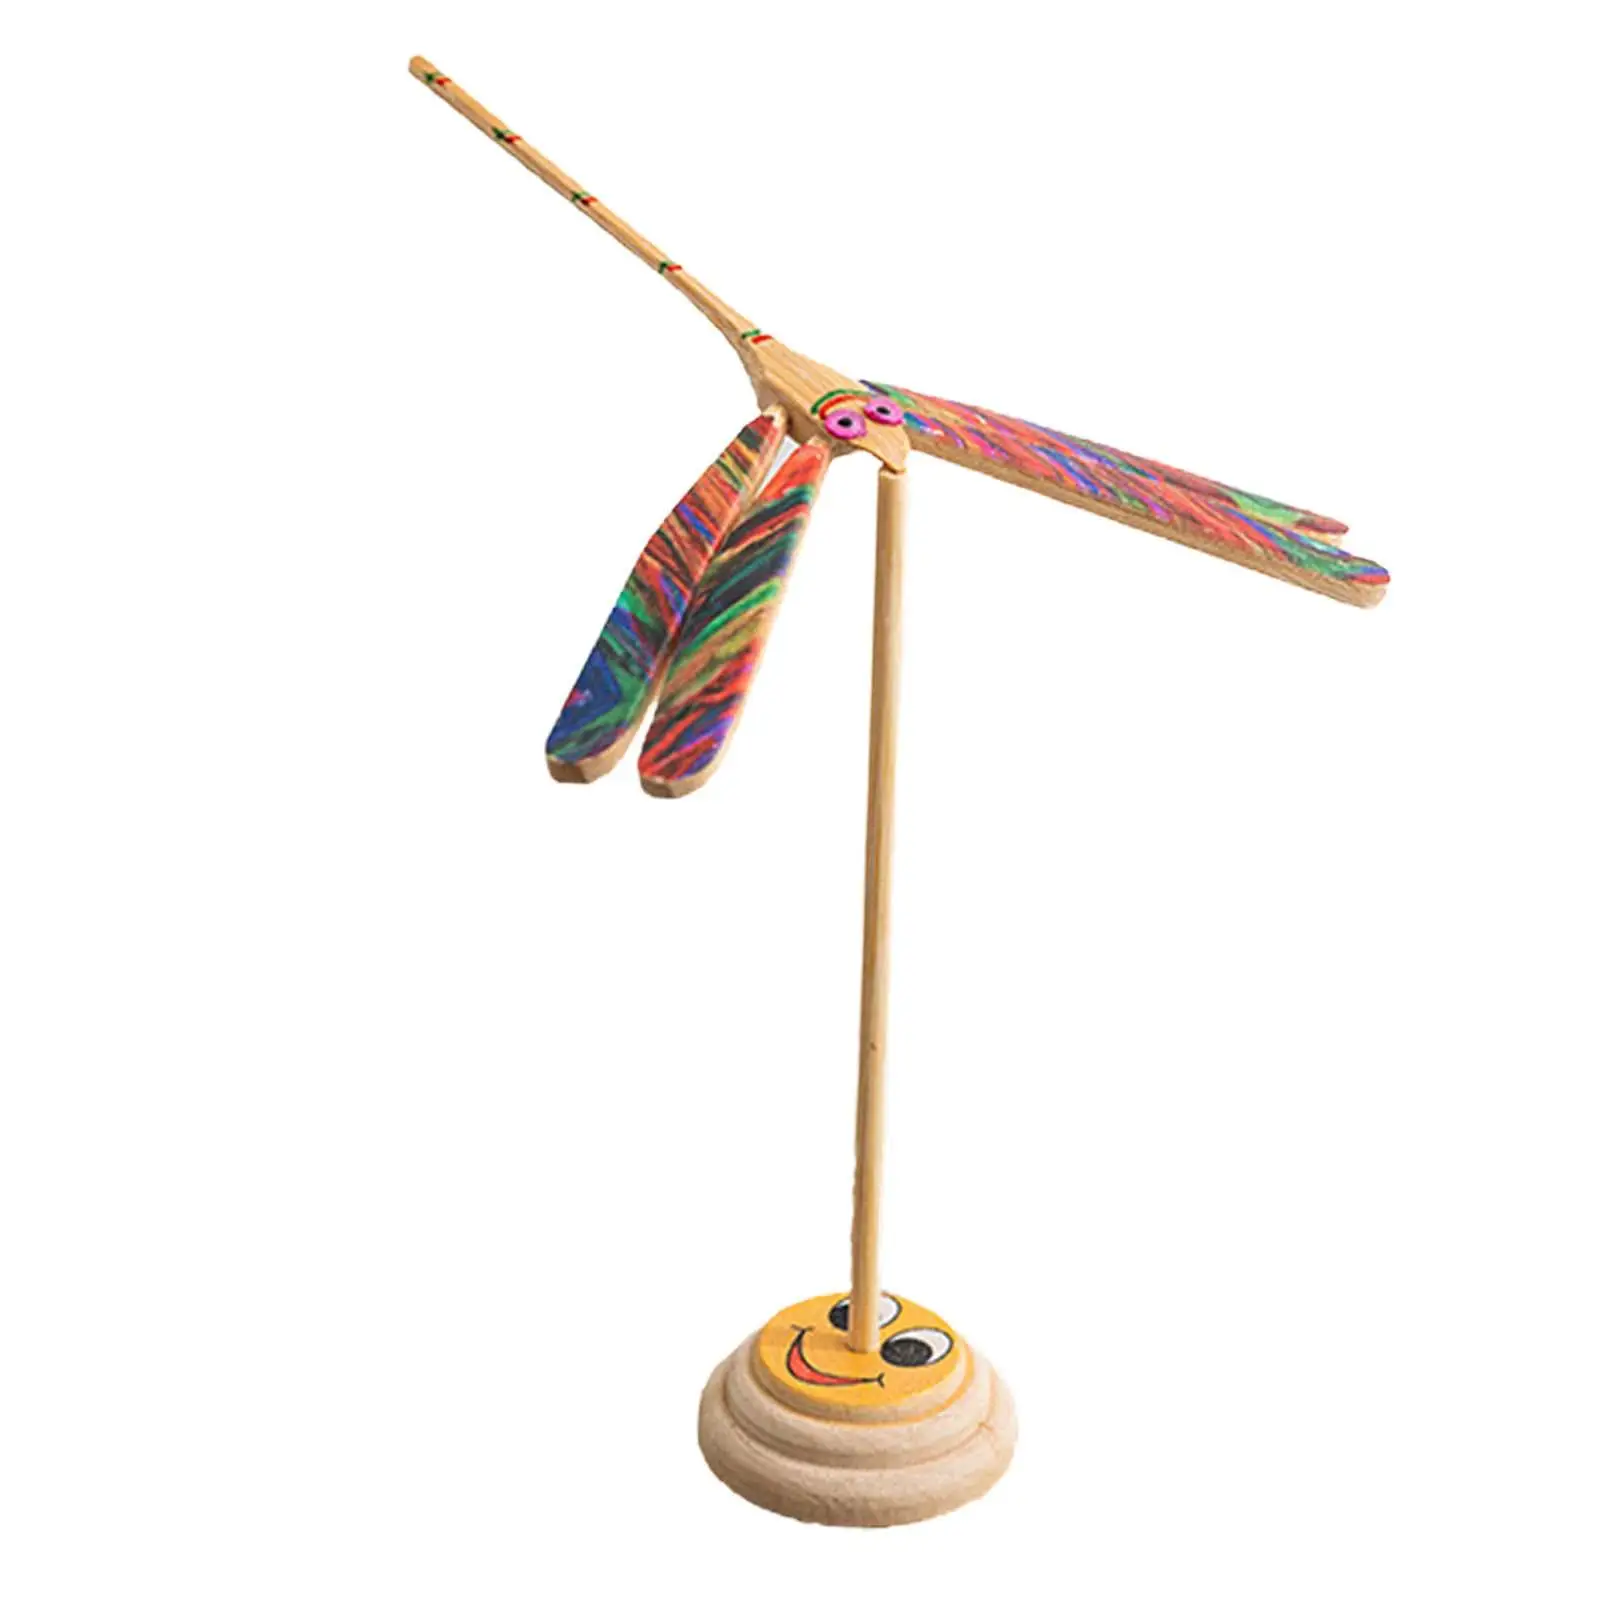 Bamboo Dragonfly Toy Handmade Educational with Stable Base Flying Helicopter Toy for Aniversary Holidays Party Favor Bedroom